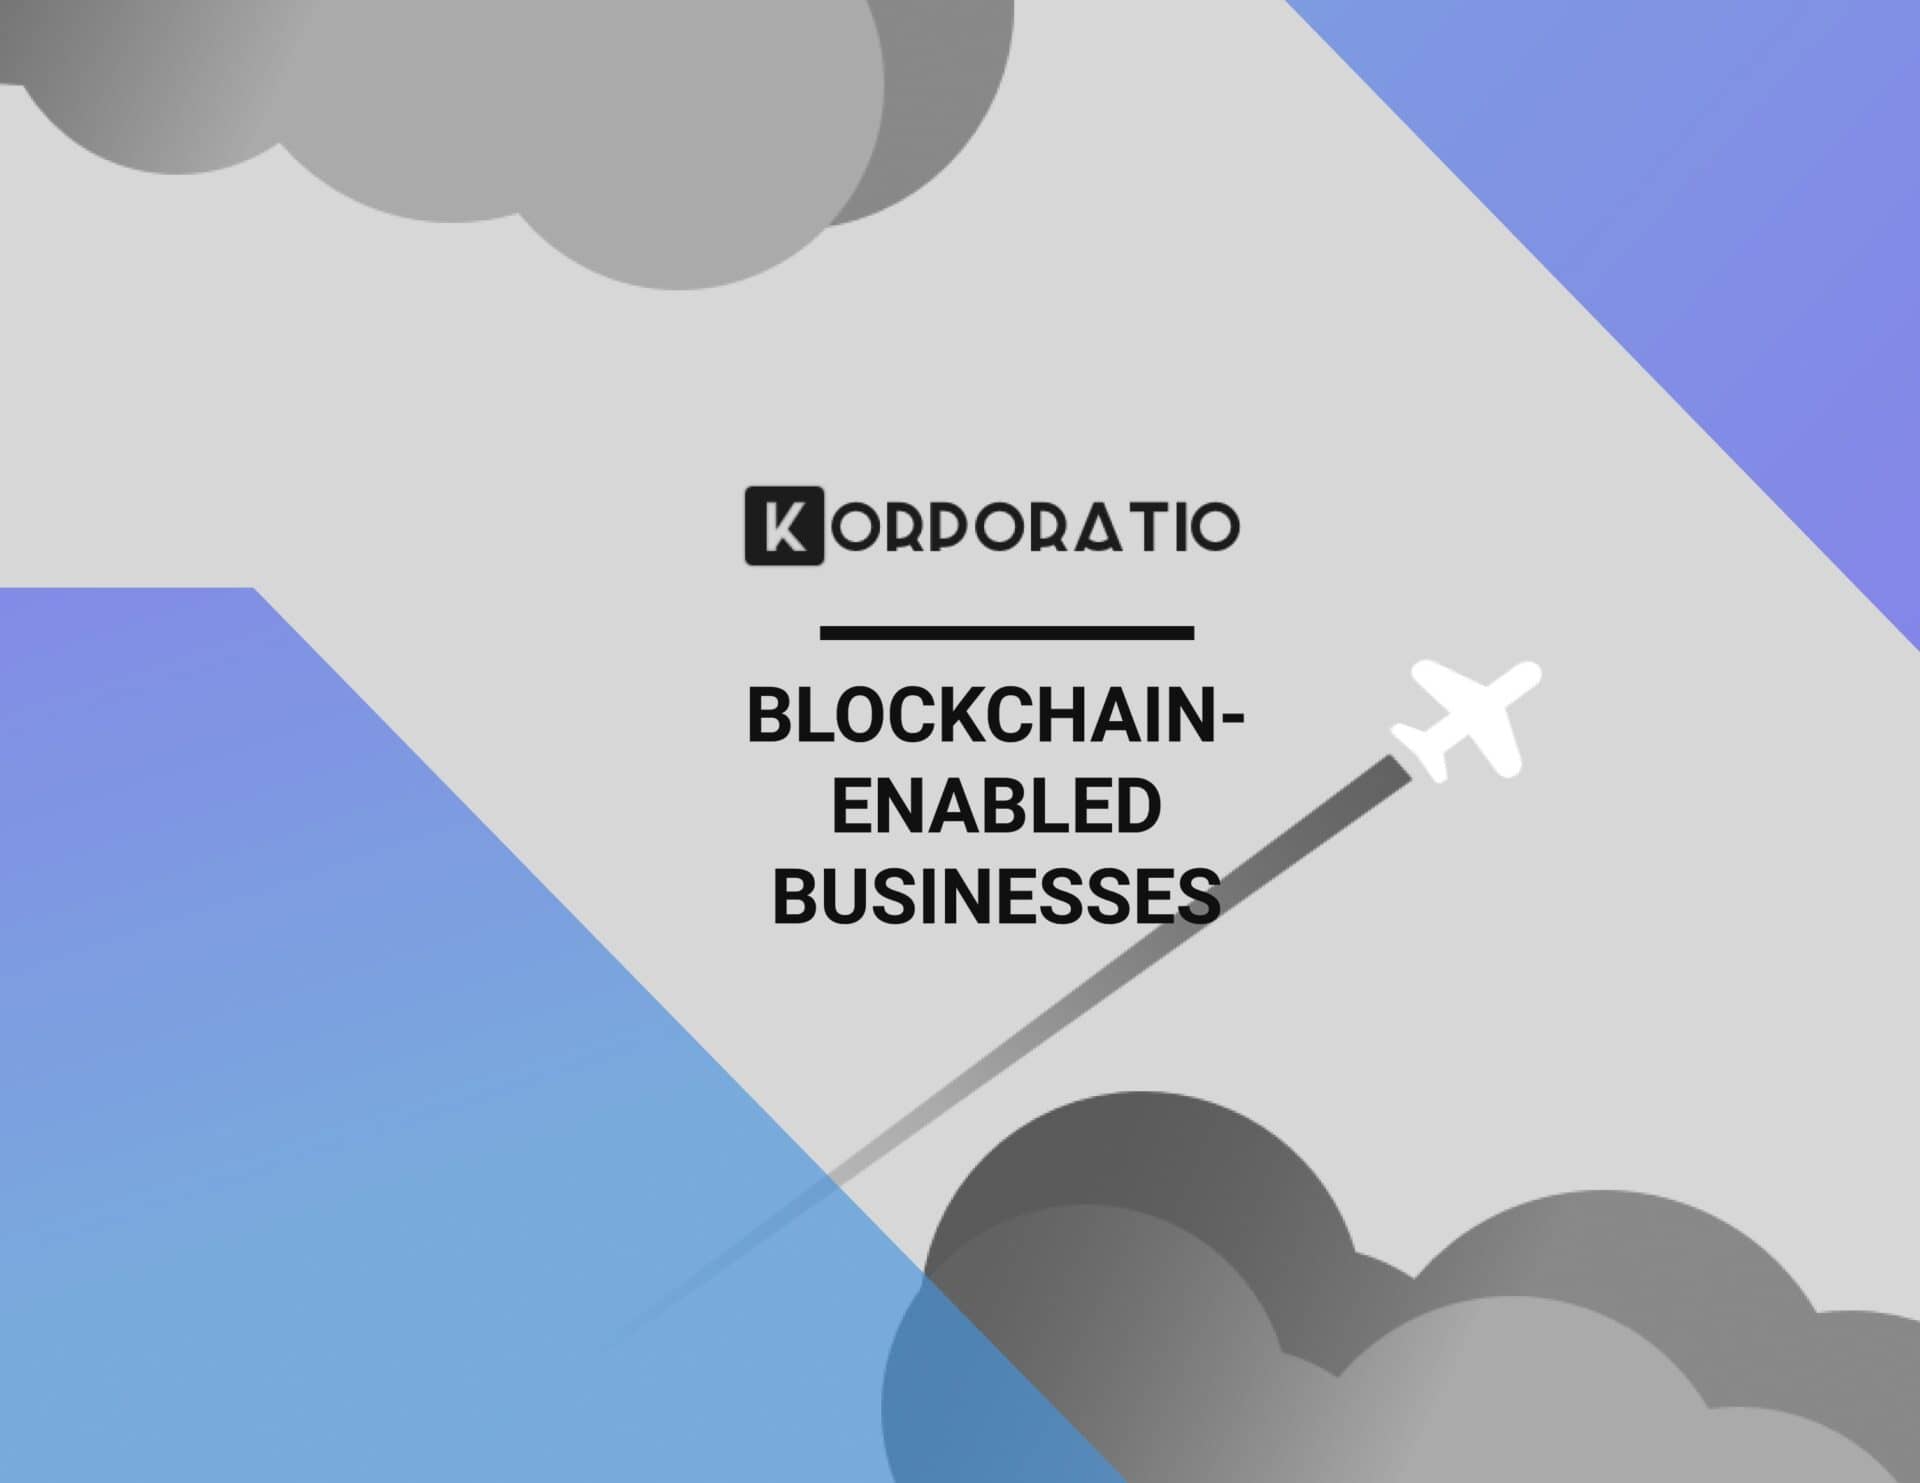 blockchain-enabled businesses